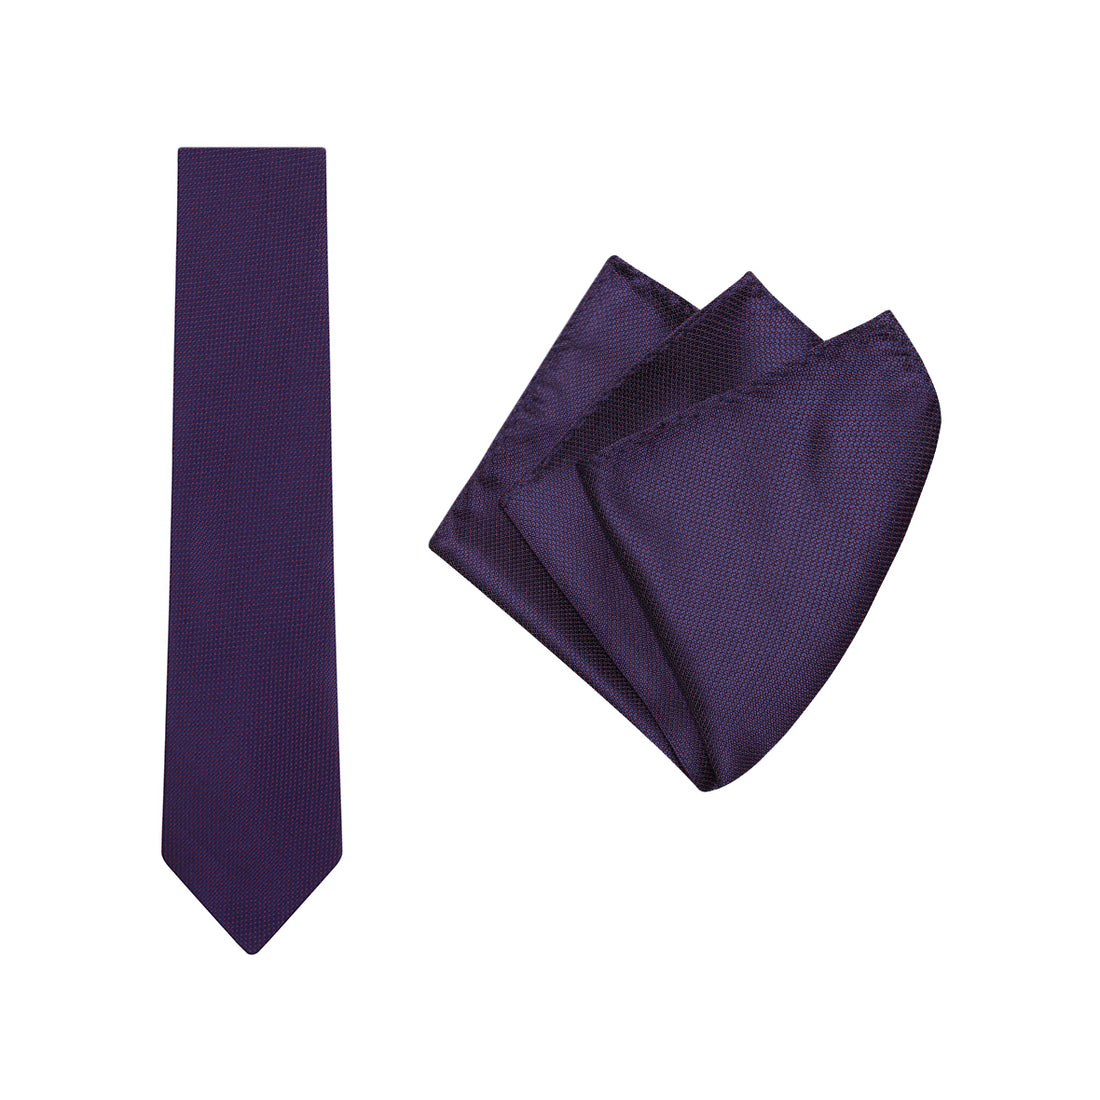 TIE + POCKET SQUARE SET. Micro Spot. Navy. Supplied with matching pocket square.-Ties-PEROZ Accessories